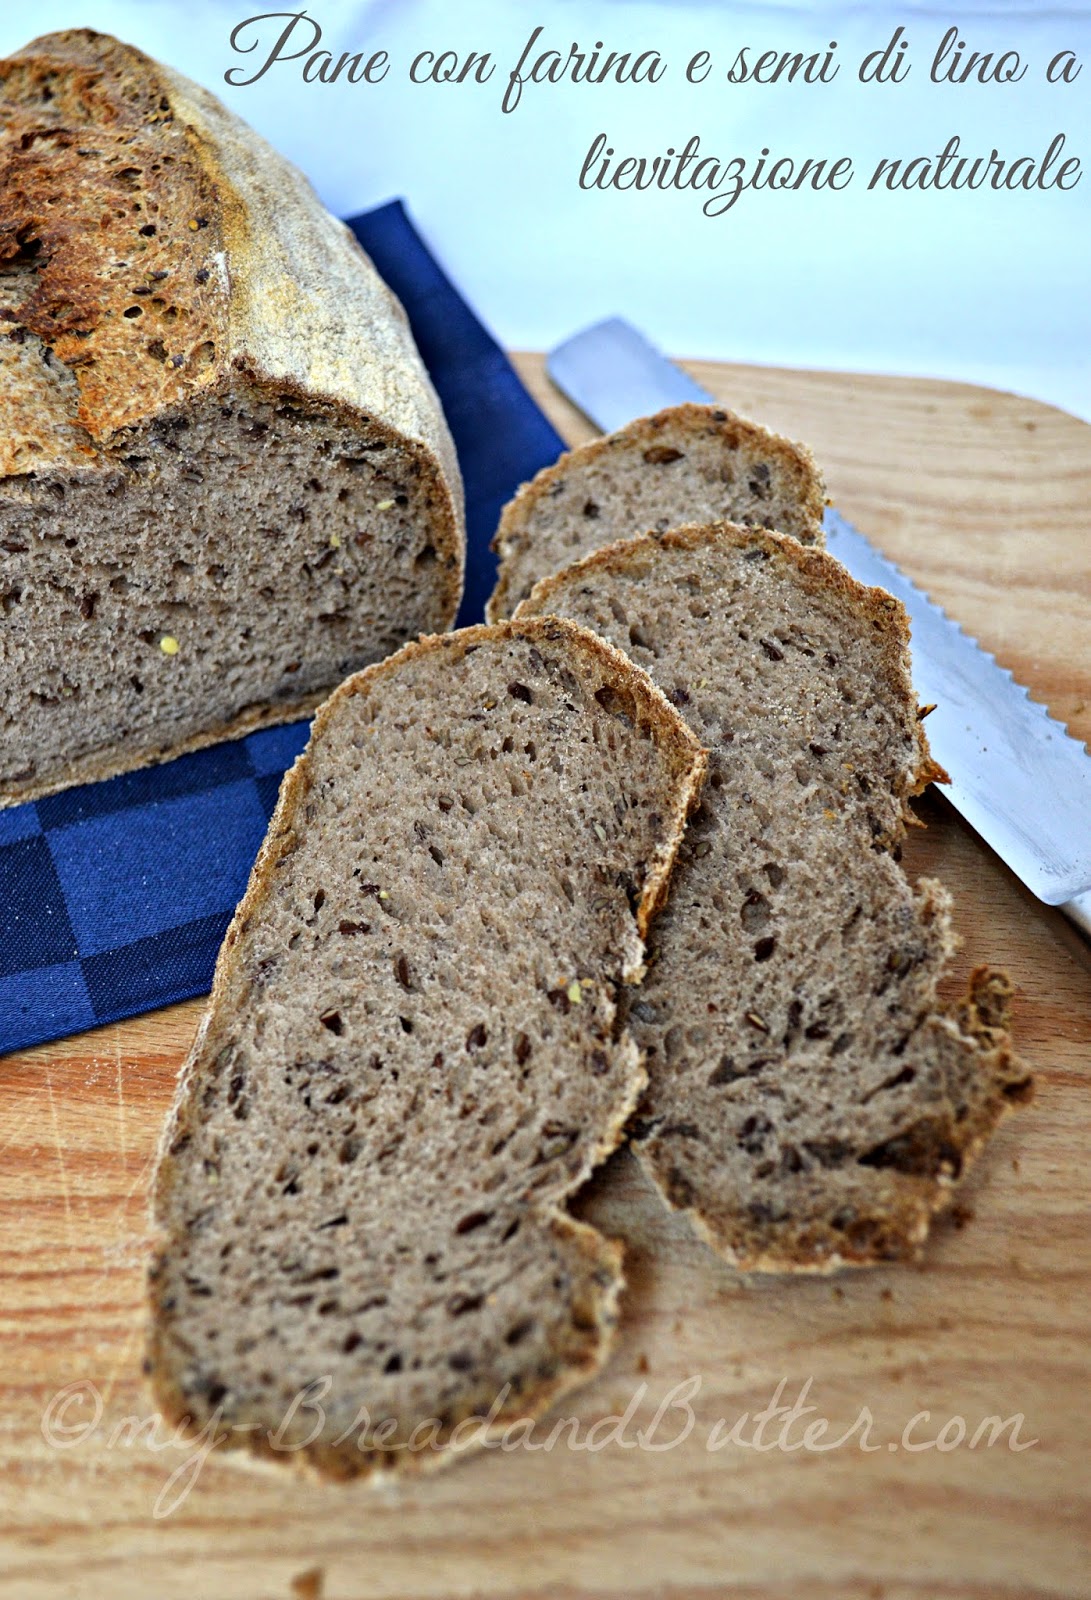 Bread with linseeds and linseeds flour 